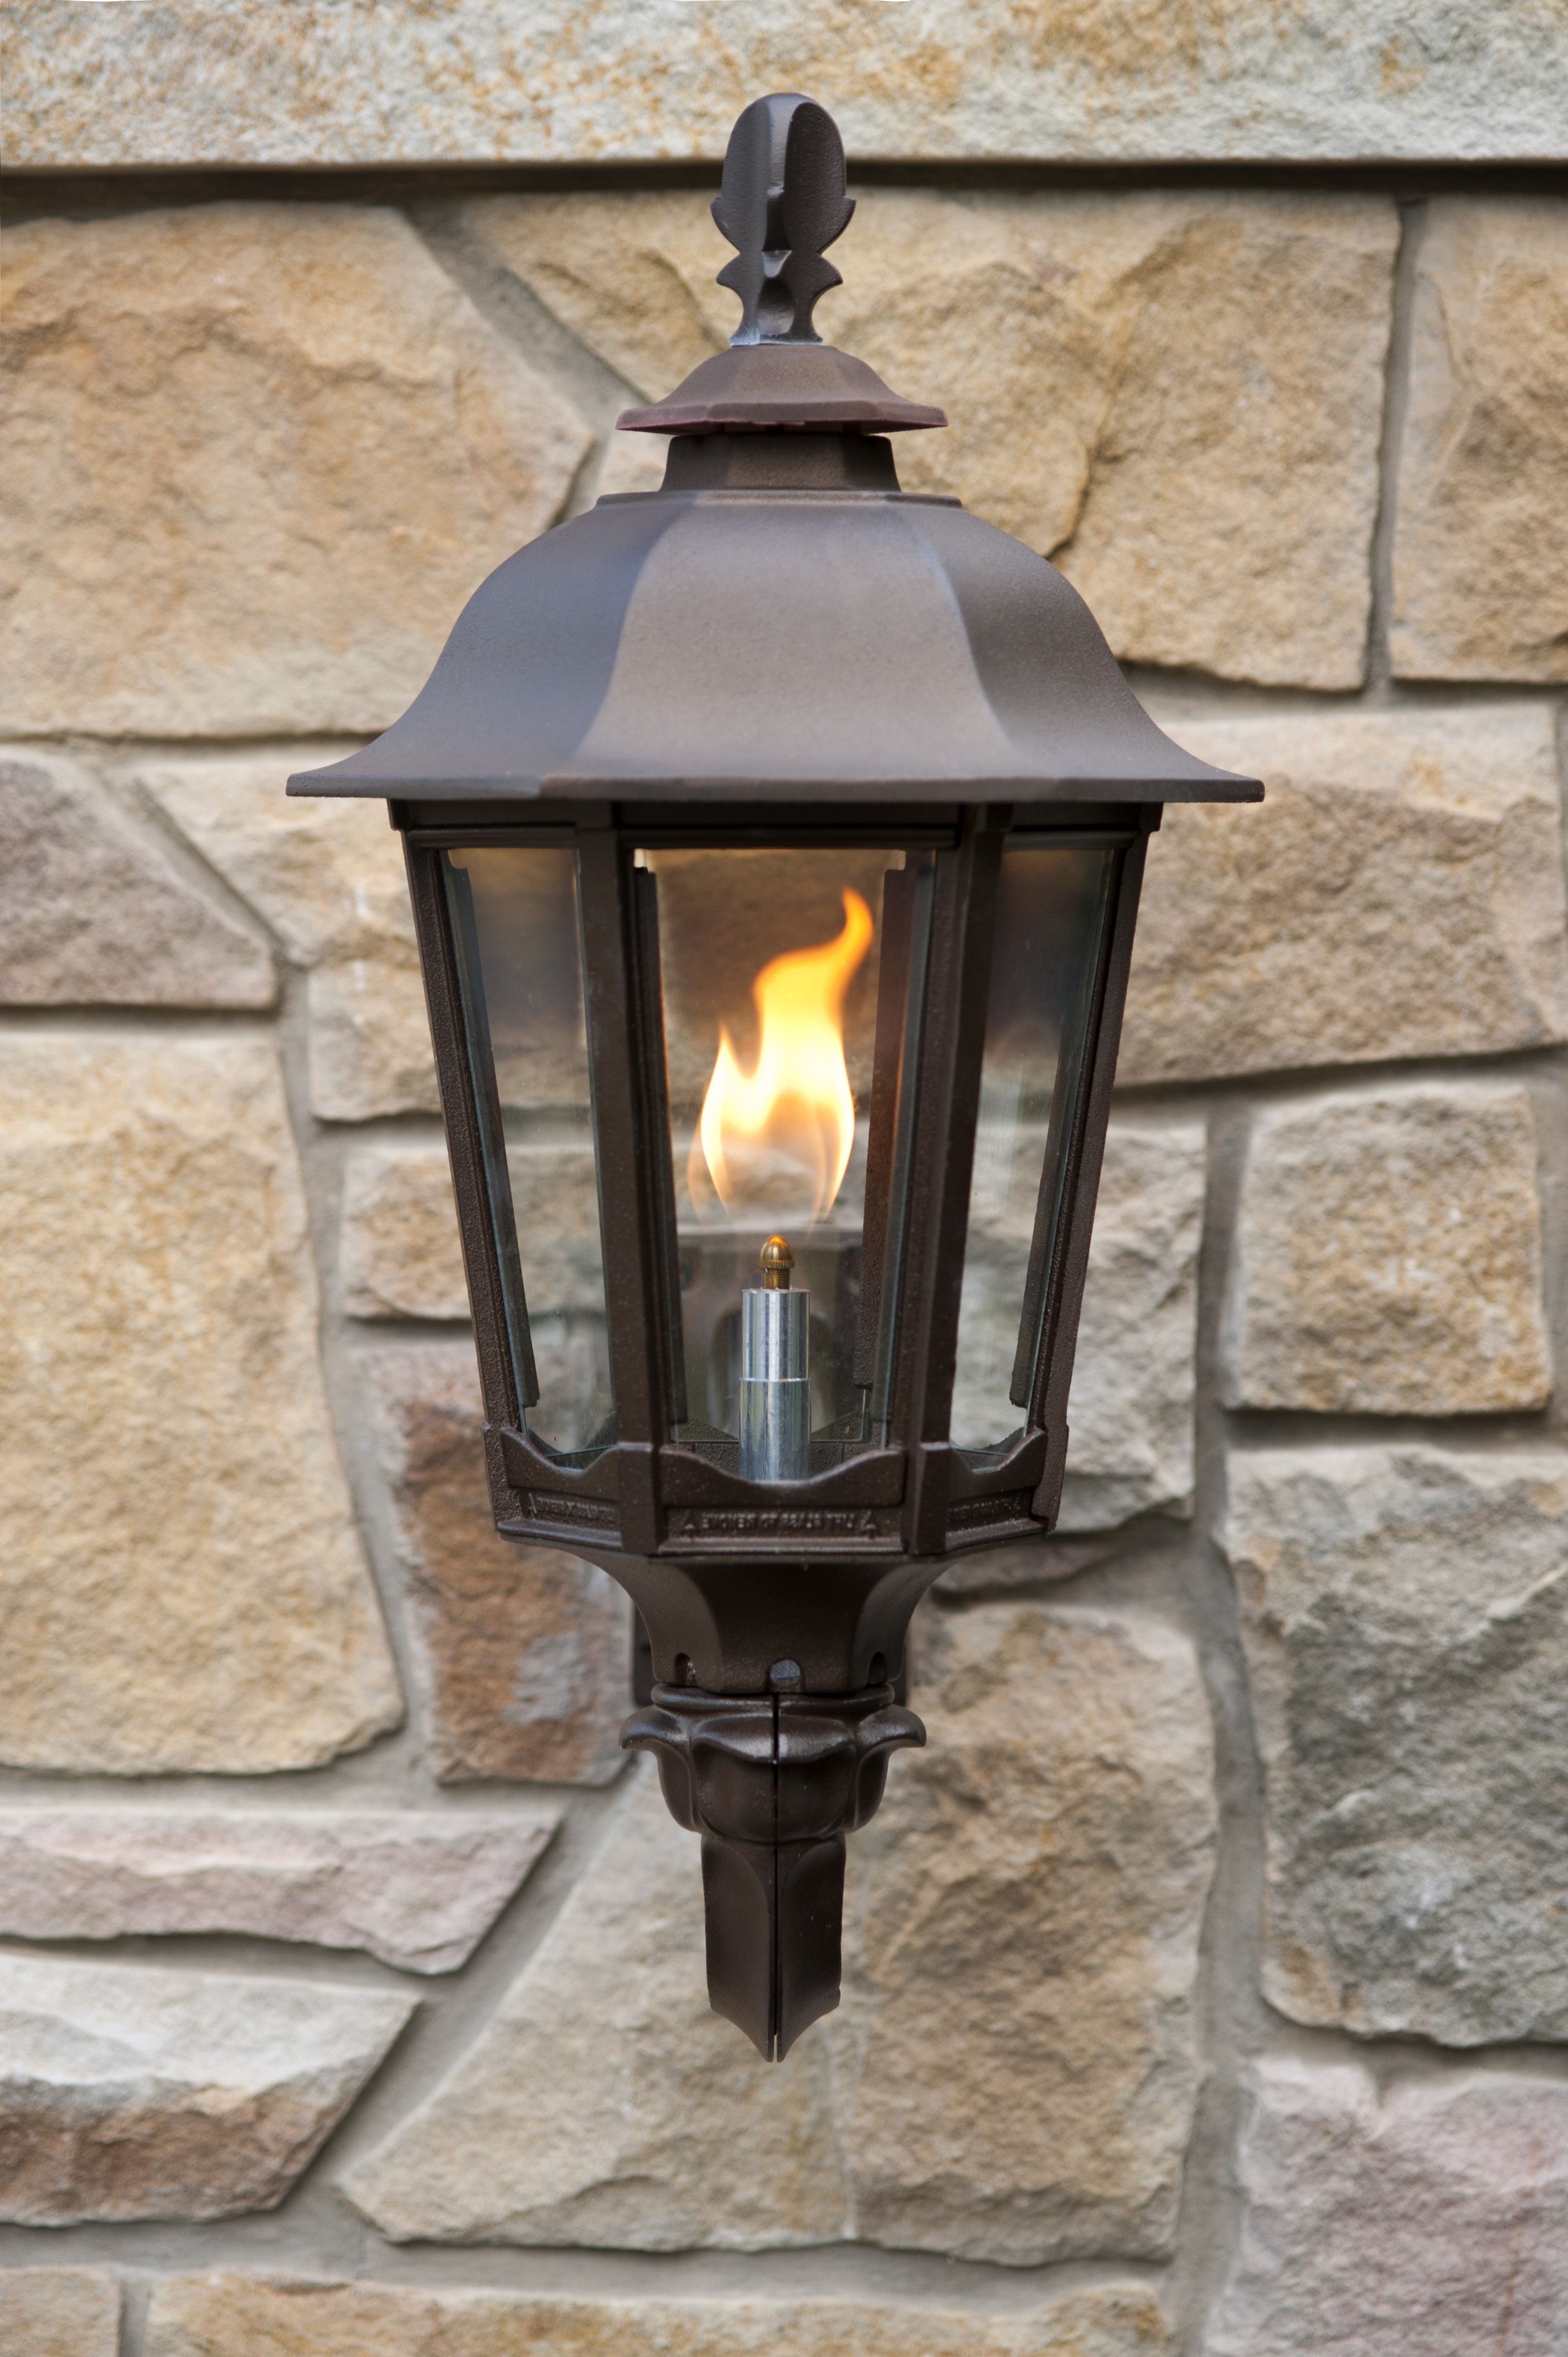 Wall Mounted Straight Open Flame Bavarian Lamps Welcome Guests To With Regard To Widely Used Outdoor Wall Mount Gas Lights (View 5 of 20)